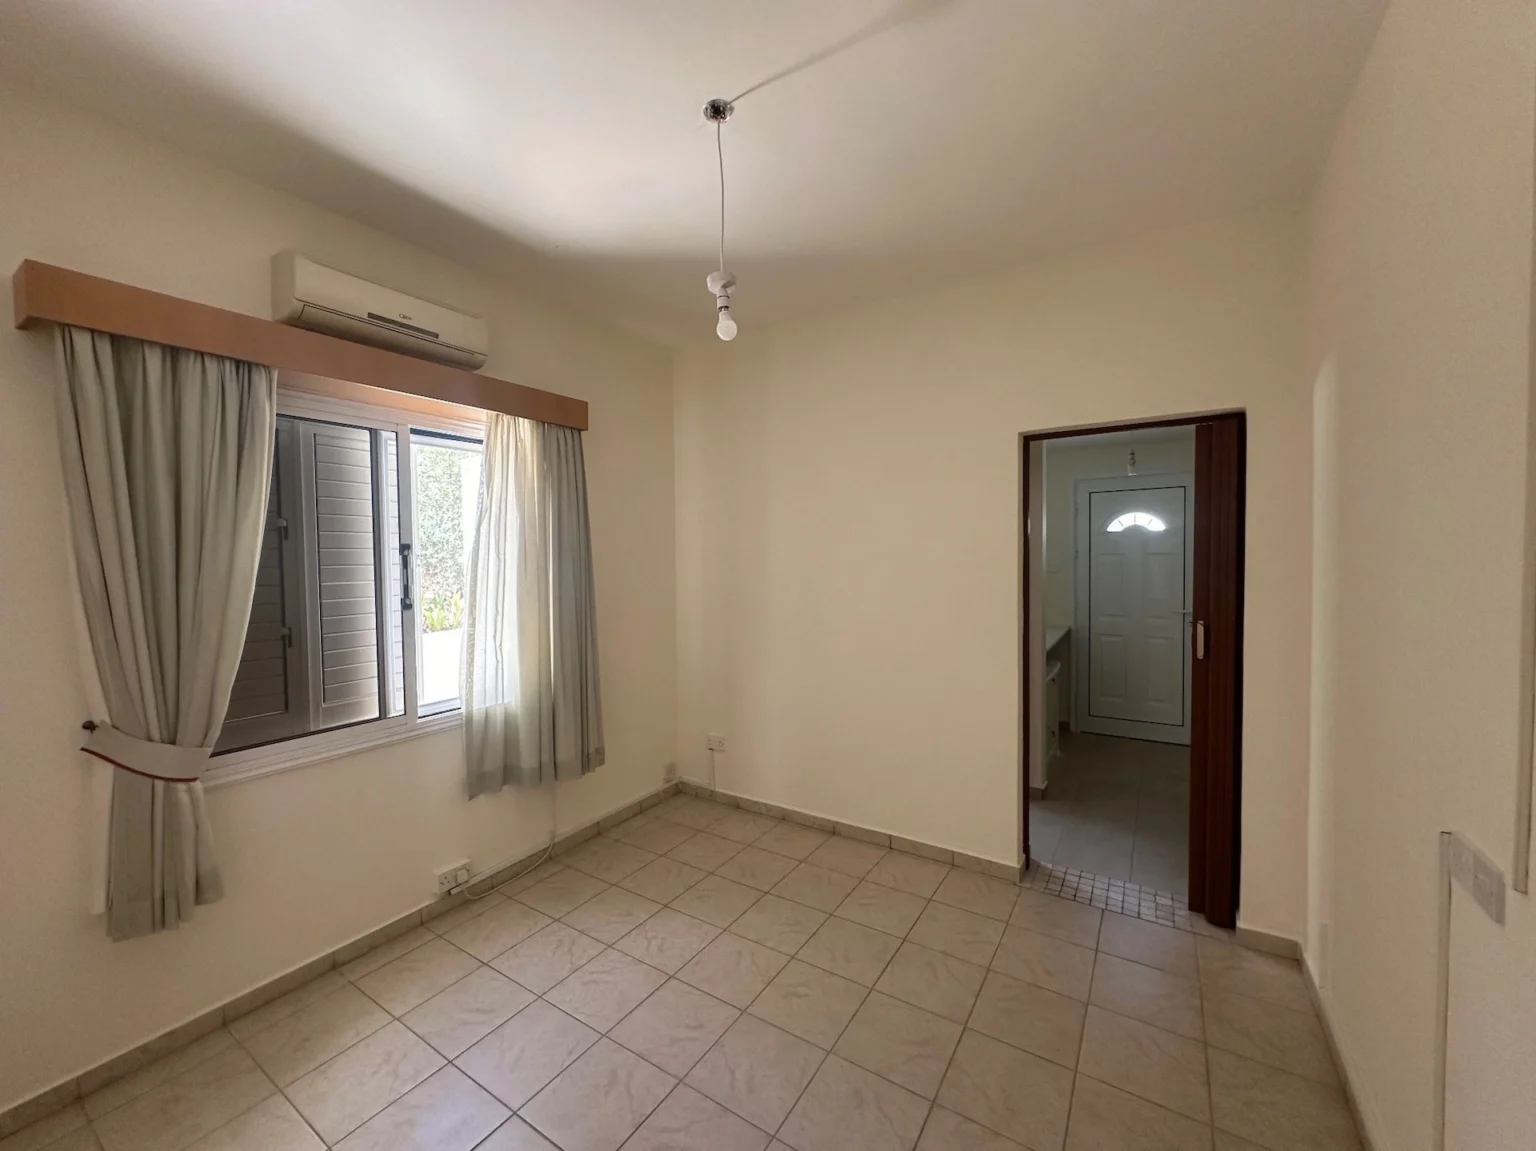 3 Bedroom House for Rent in Paphos District